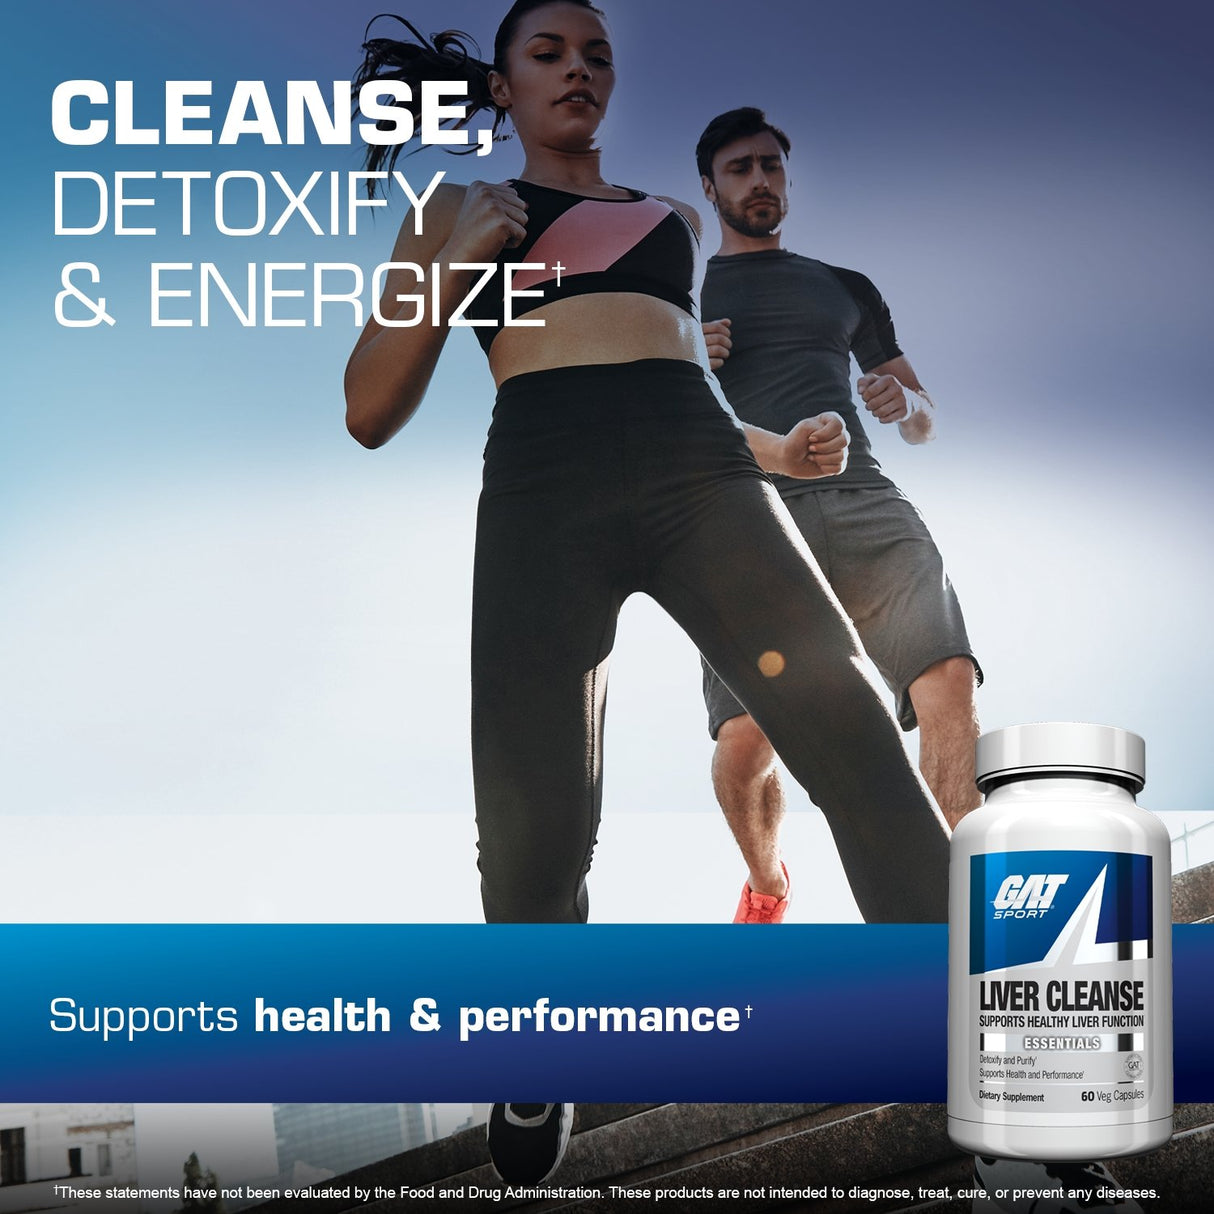 GAT SPORT LIVER CLEANSE - cleanse, detoxify, and energize